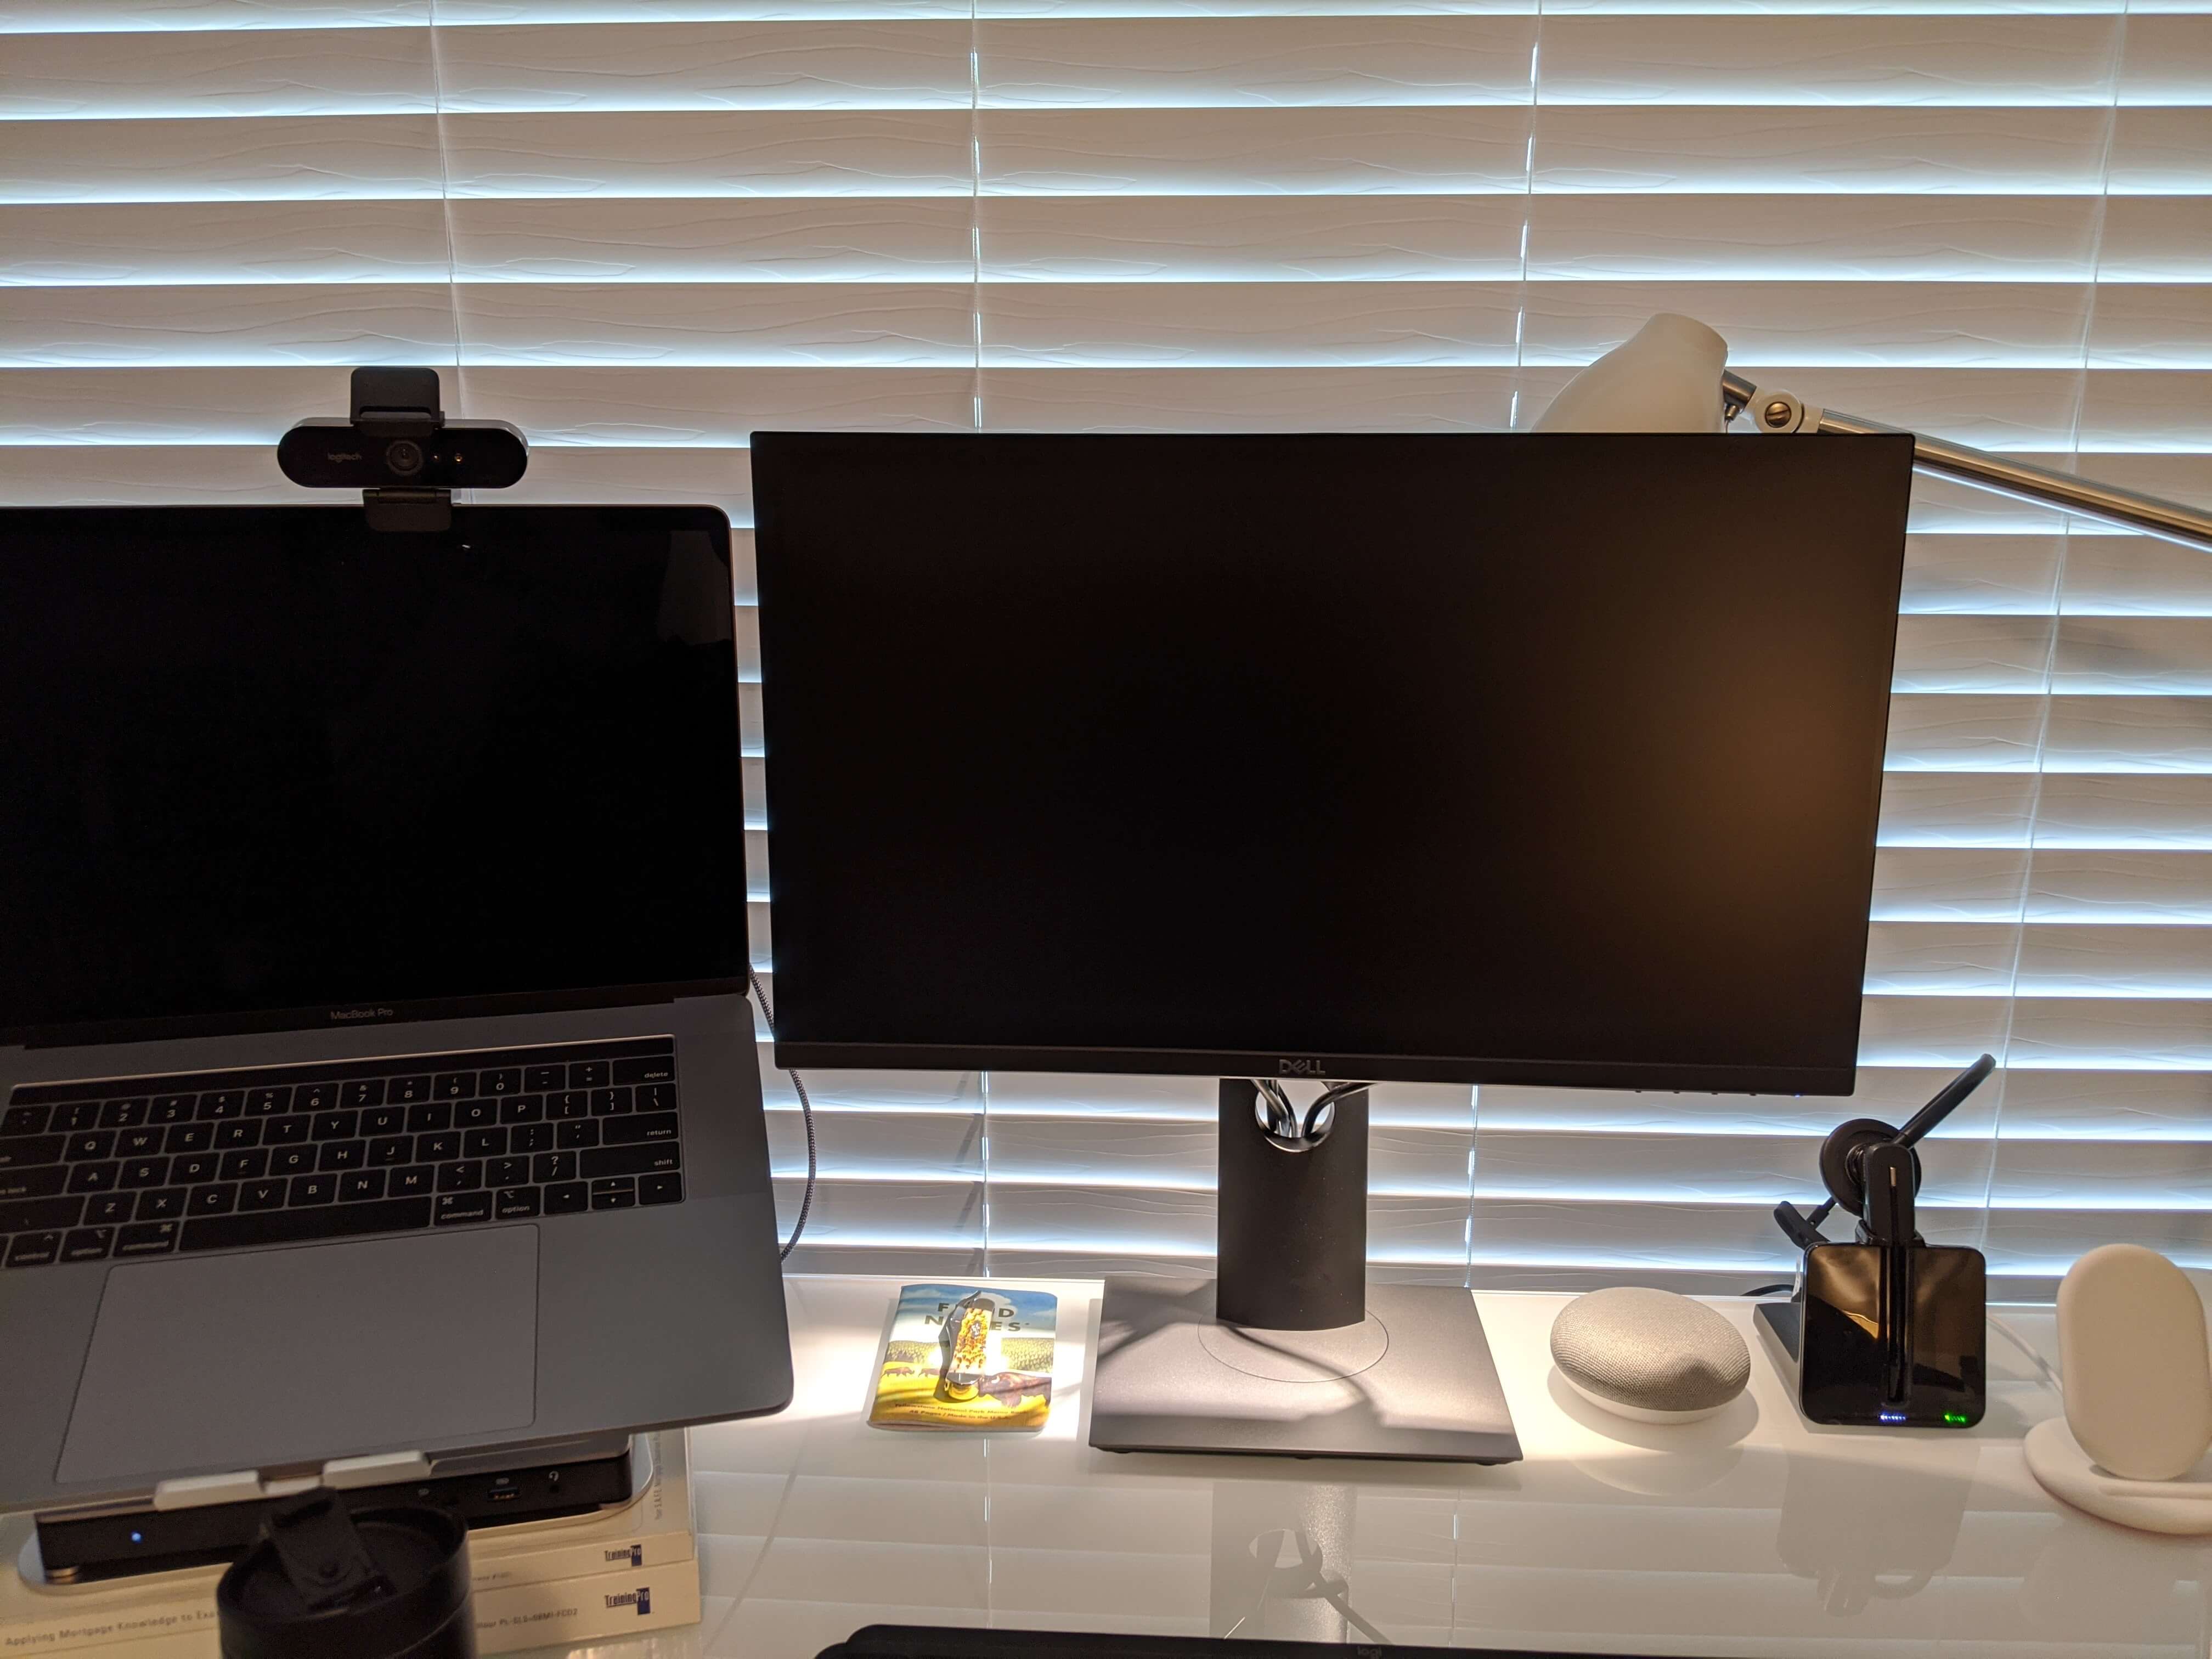 A picture of computer monitors with a lamp placed behind them